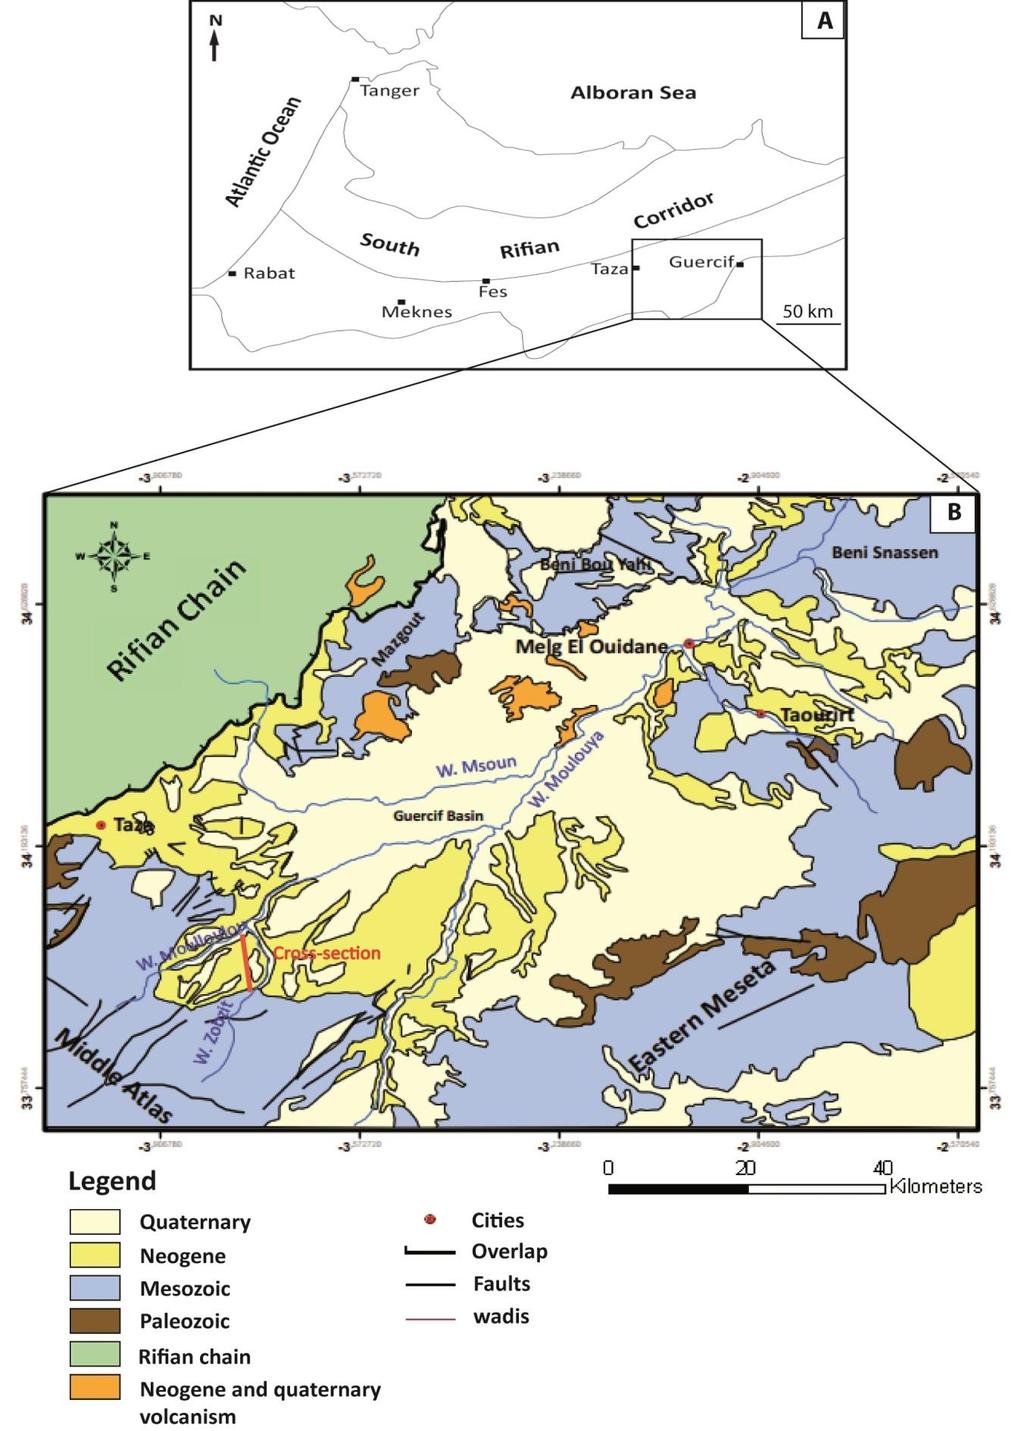 Amakrane et al. - Paleoenvironment, sequence stratigraphy of the late Miocene, Guercif basin, Morocco 97 Figure 1. A.